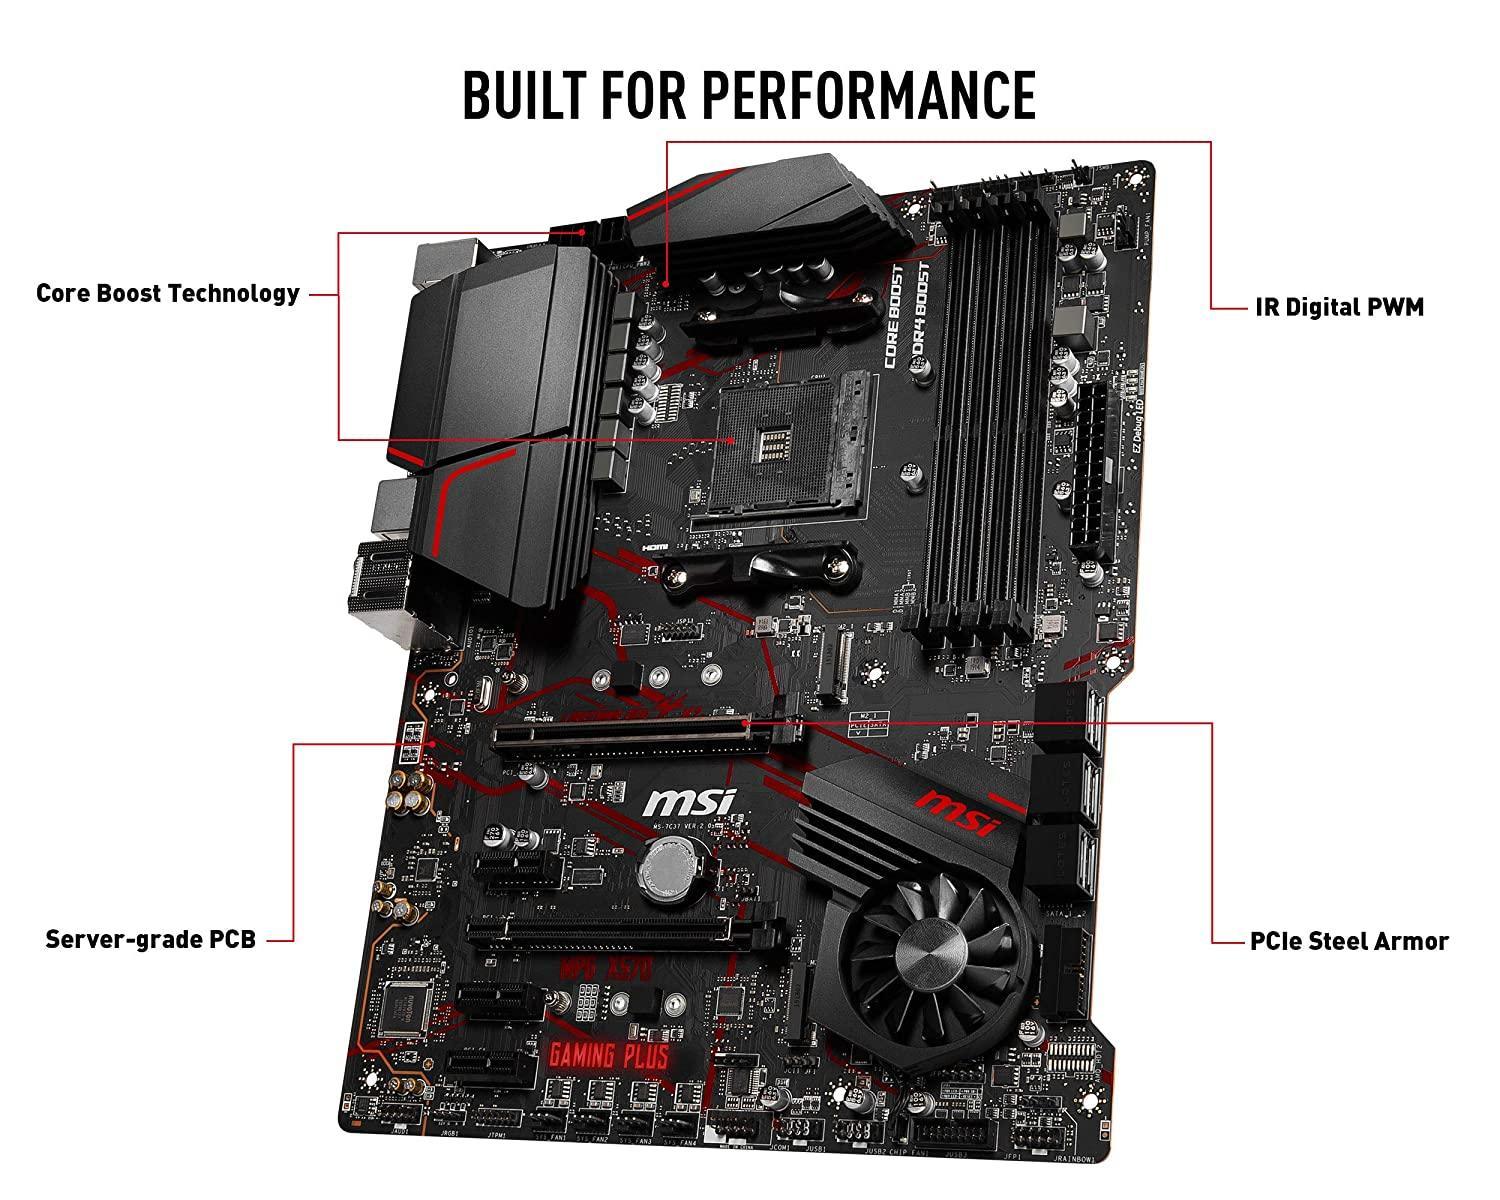 MSI MPG X570 Gaming Plus Motherboard (AMD AM4, PCIe 4.0, DDR4, SATA 6Gb/s, M.2, USB 3.2 Gen 2, HDMI, ATX) - Store For Gamers